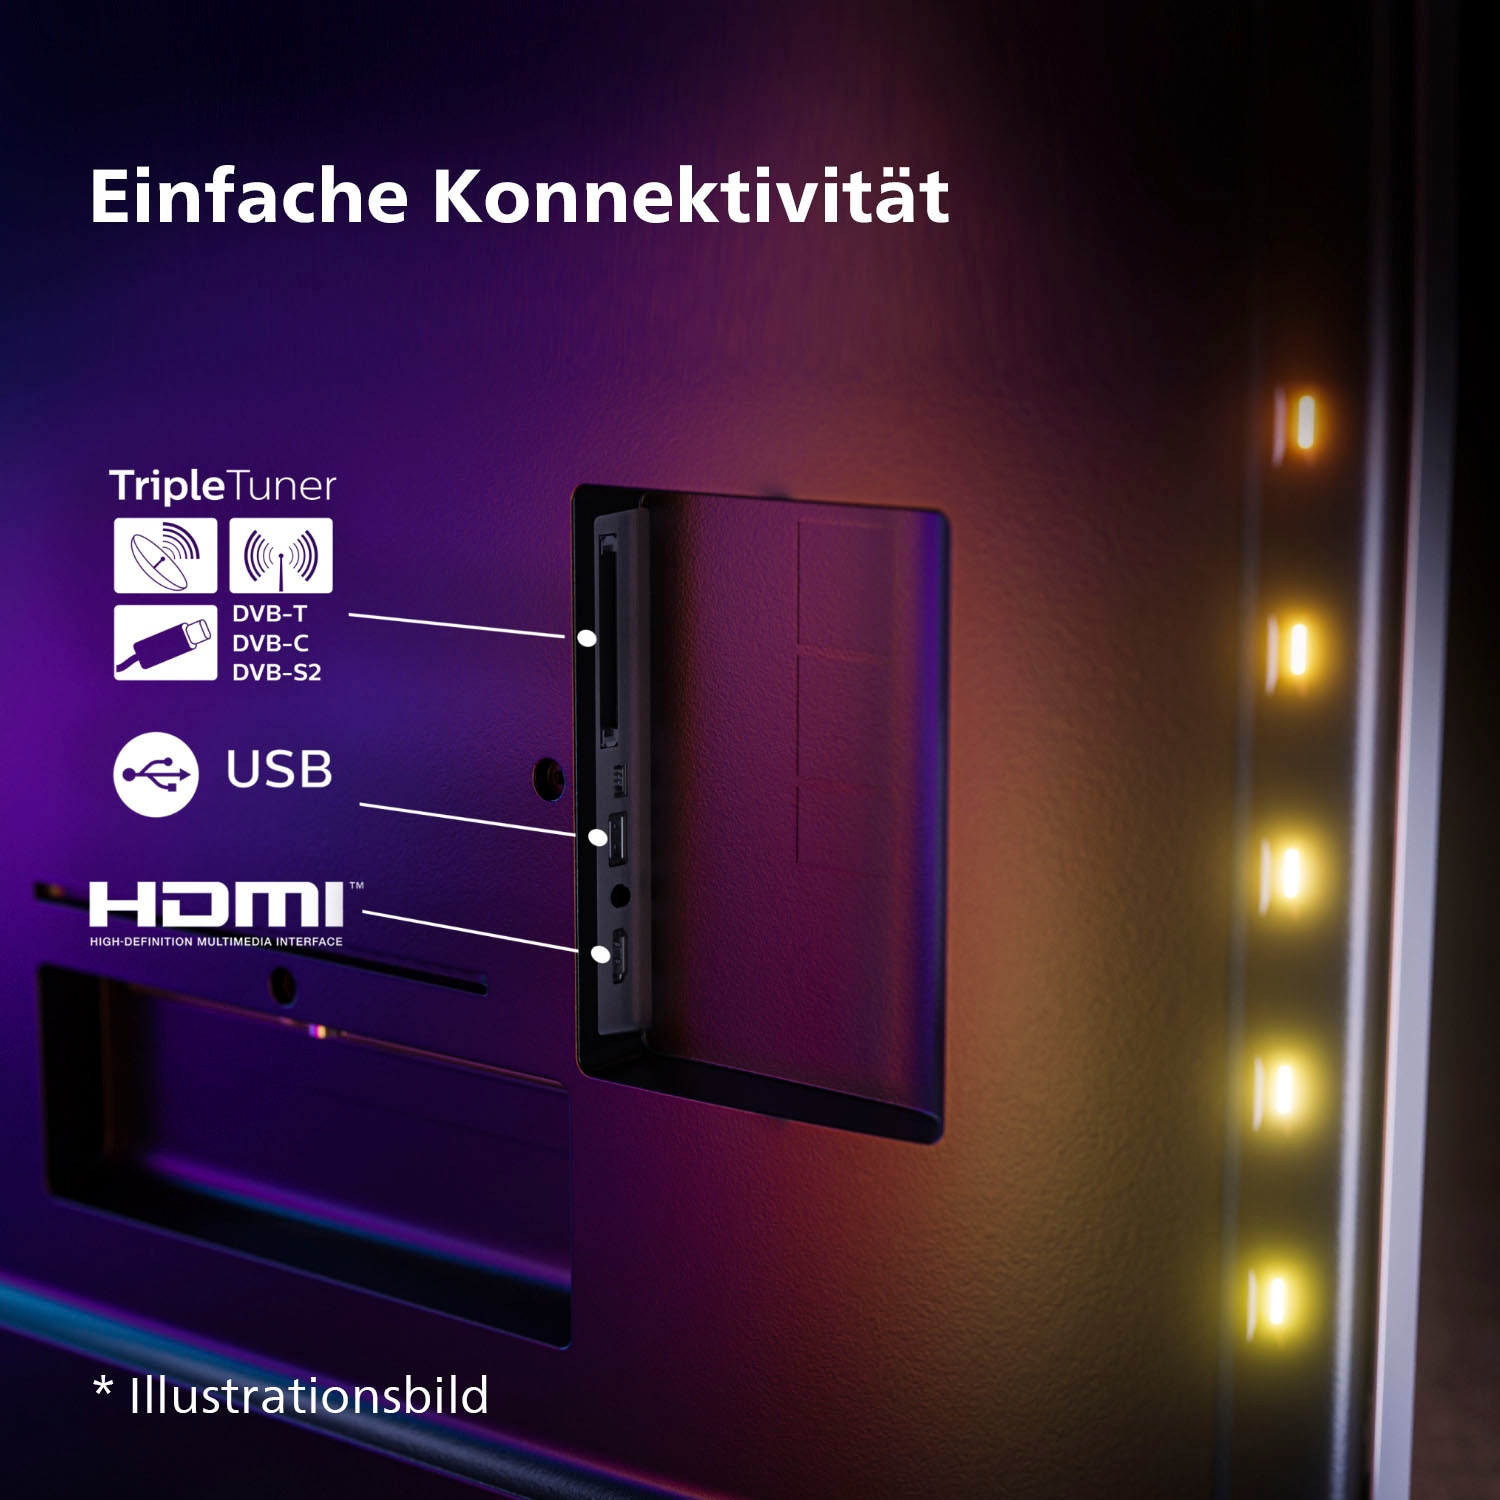 Philips LED-Fernseher, 126 cm/50 Zoll, 4K Ultra HD, Android TV-Google TV-Smart-TV, 3-seitiges Ambilight